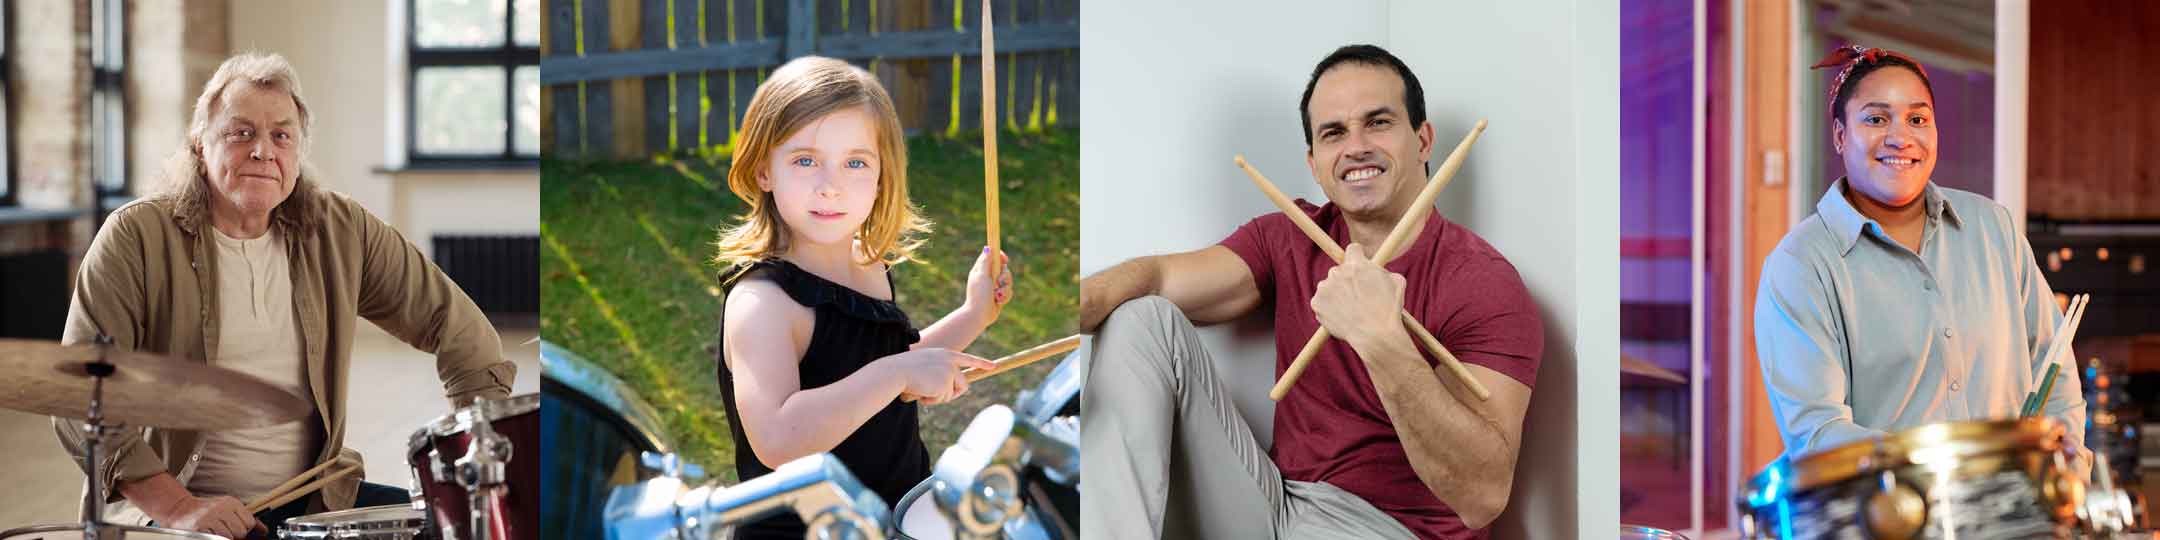 Drum Lessons NYC Student Lineup 1